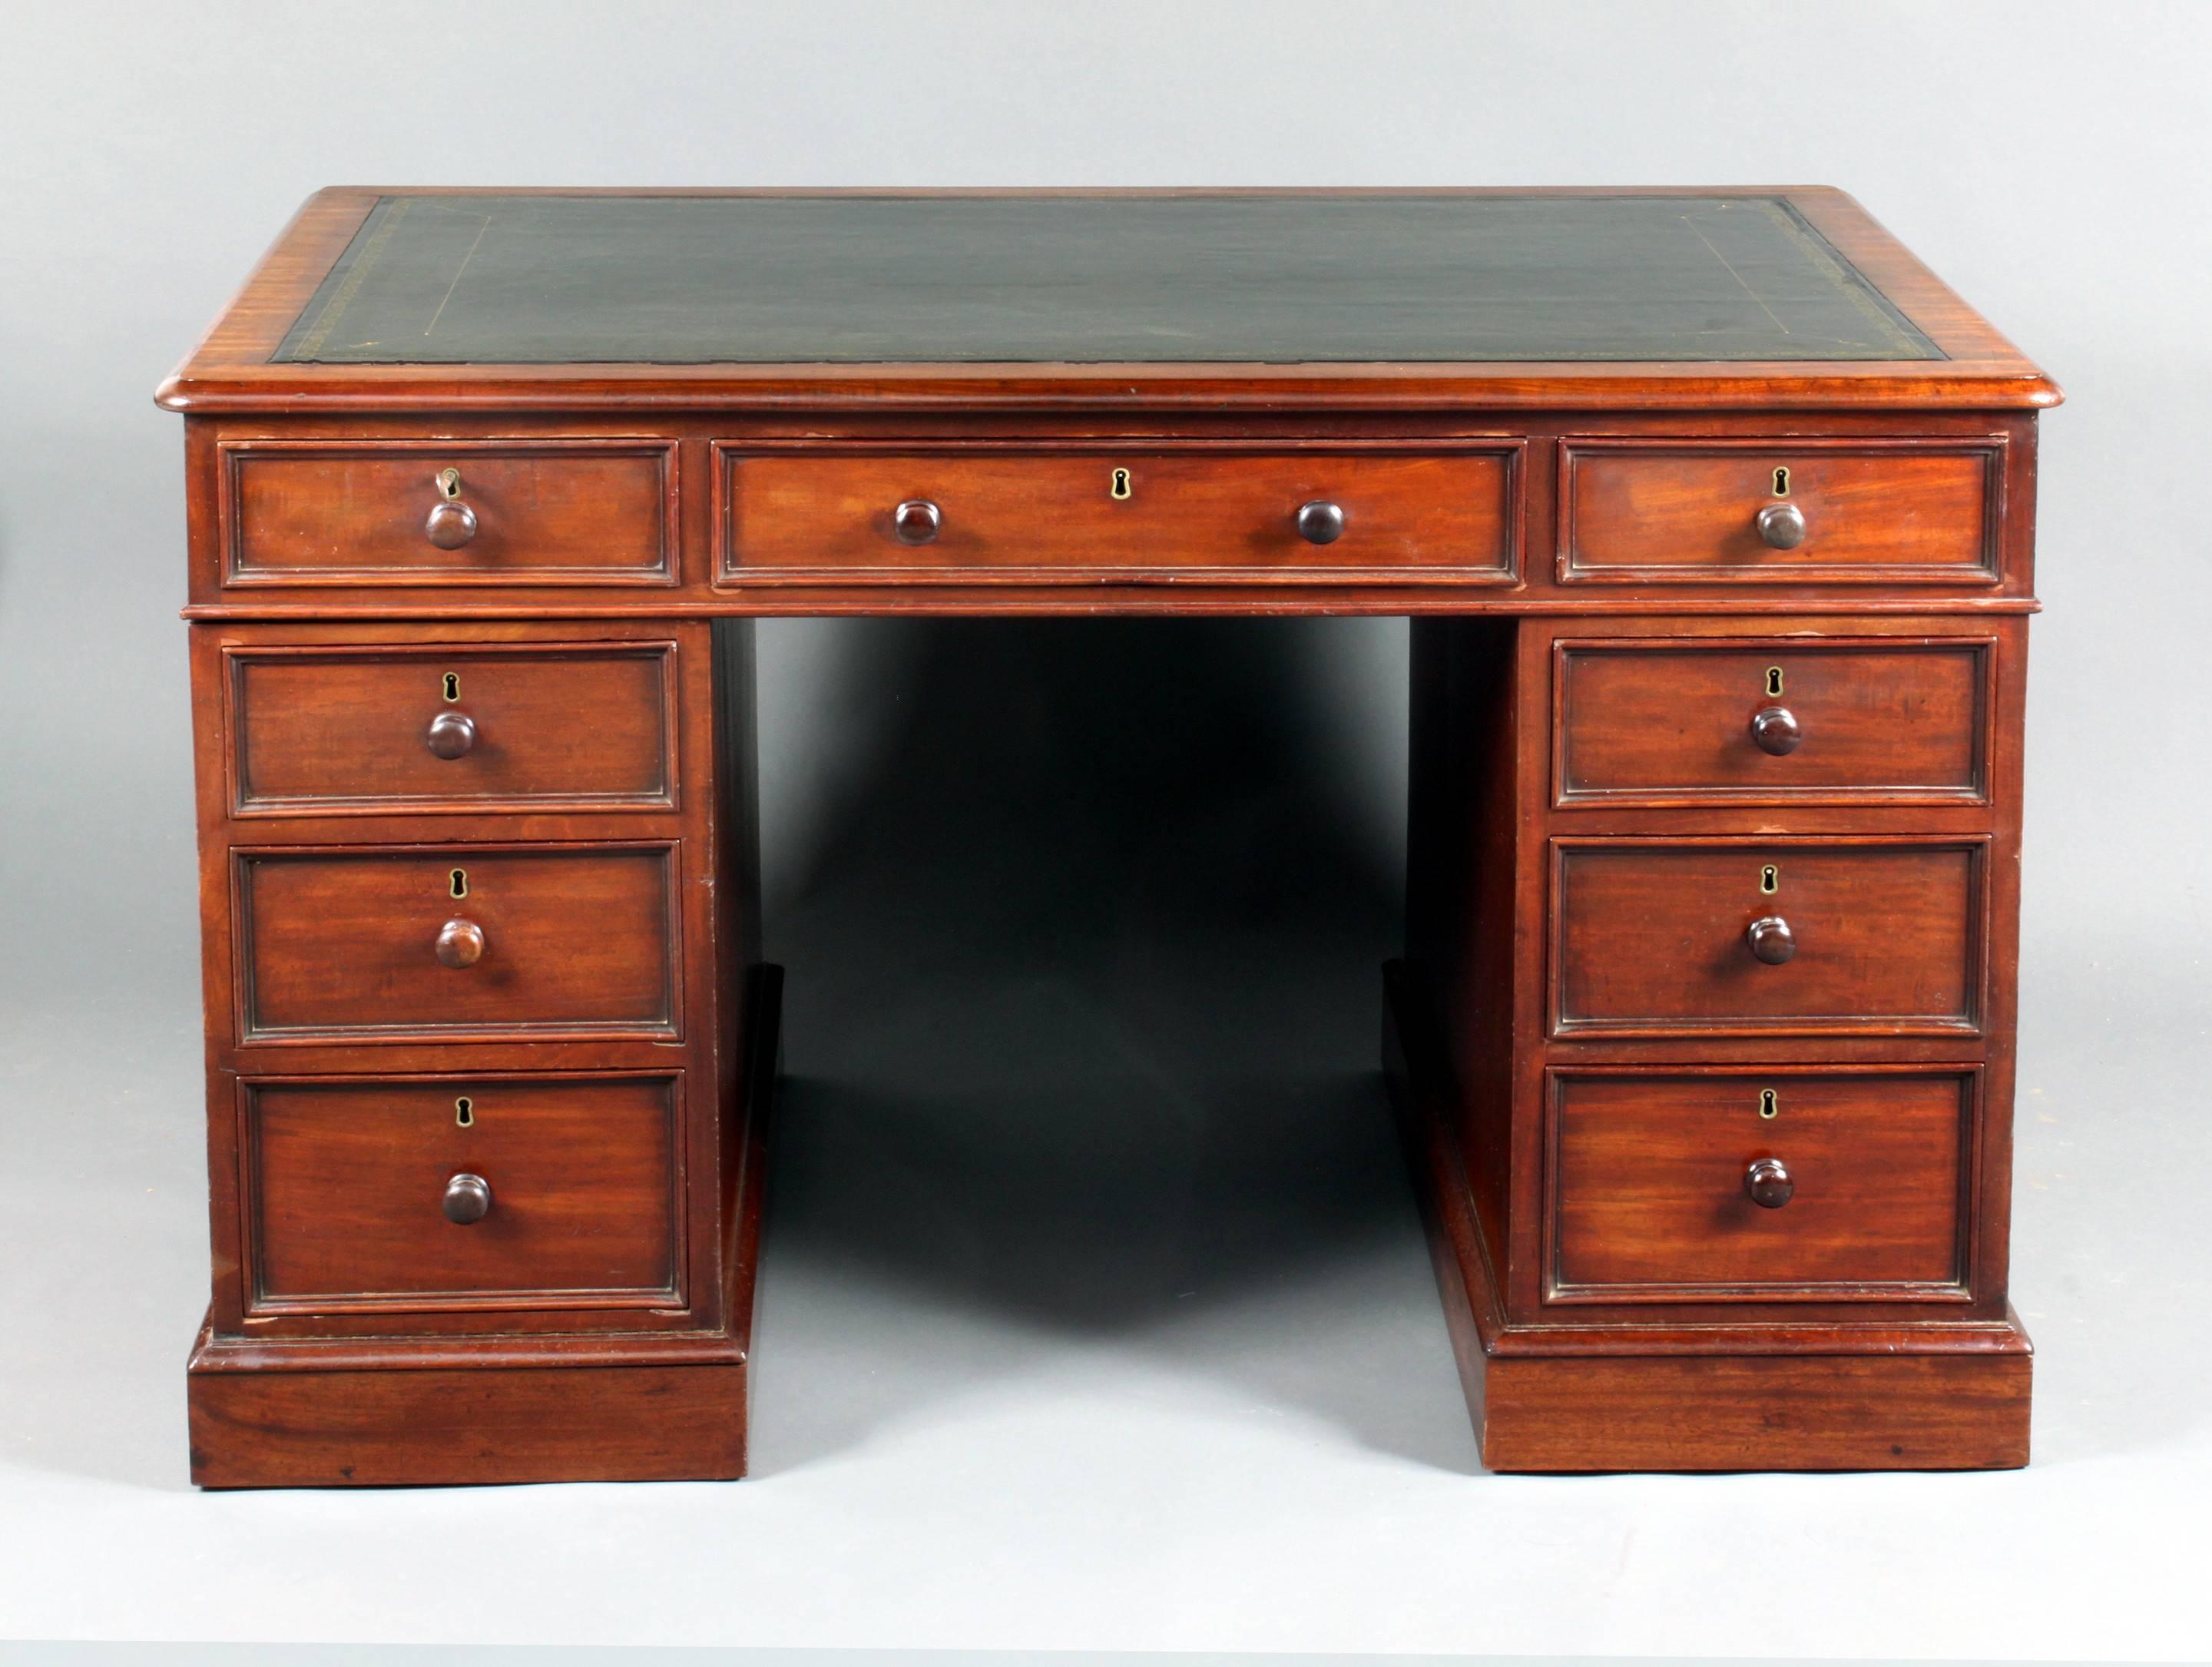 A fine quality figured mahogany pedestal desk: Good model with raised drawer mouldings, false drawers on the back, oak drawer linings and recently fitted dark green hide.